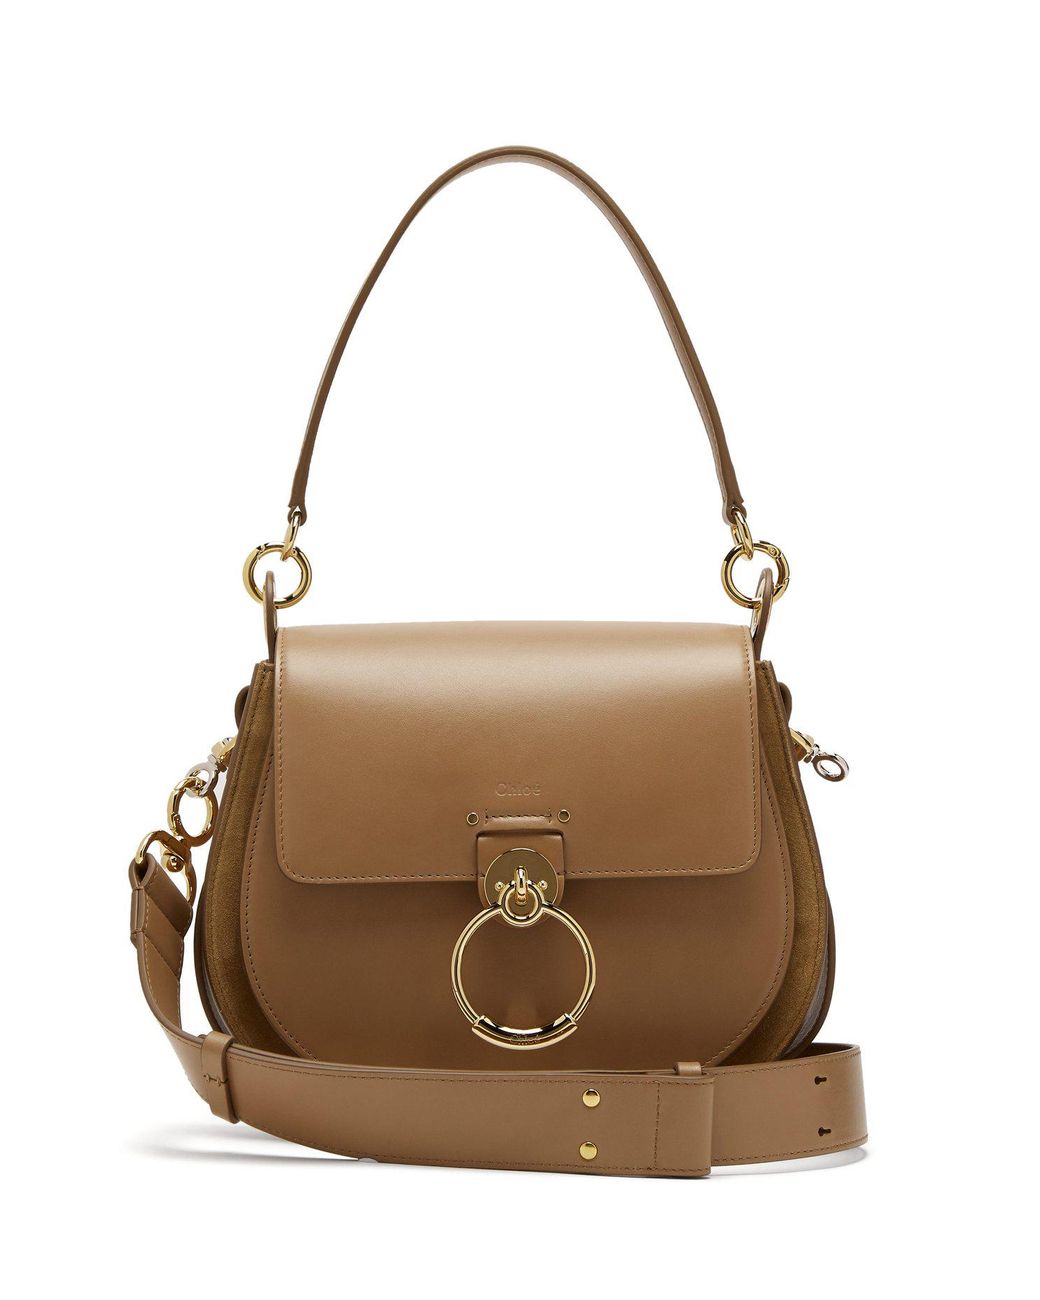 Chloé Tess Medium Leather And Suede Cross-body Bag in Brown